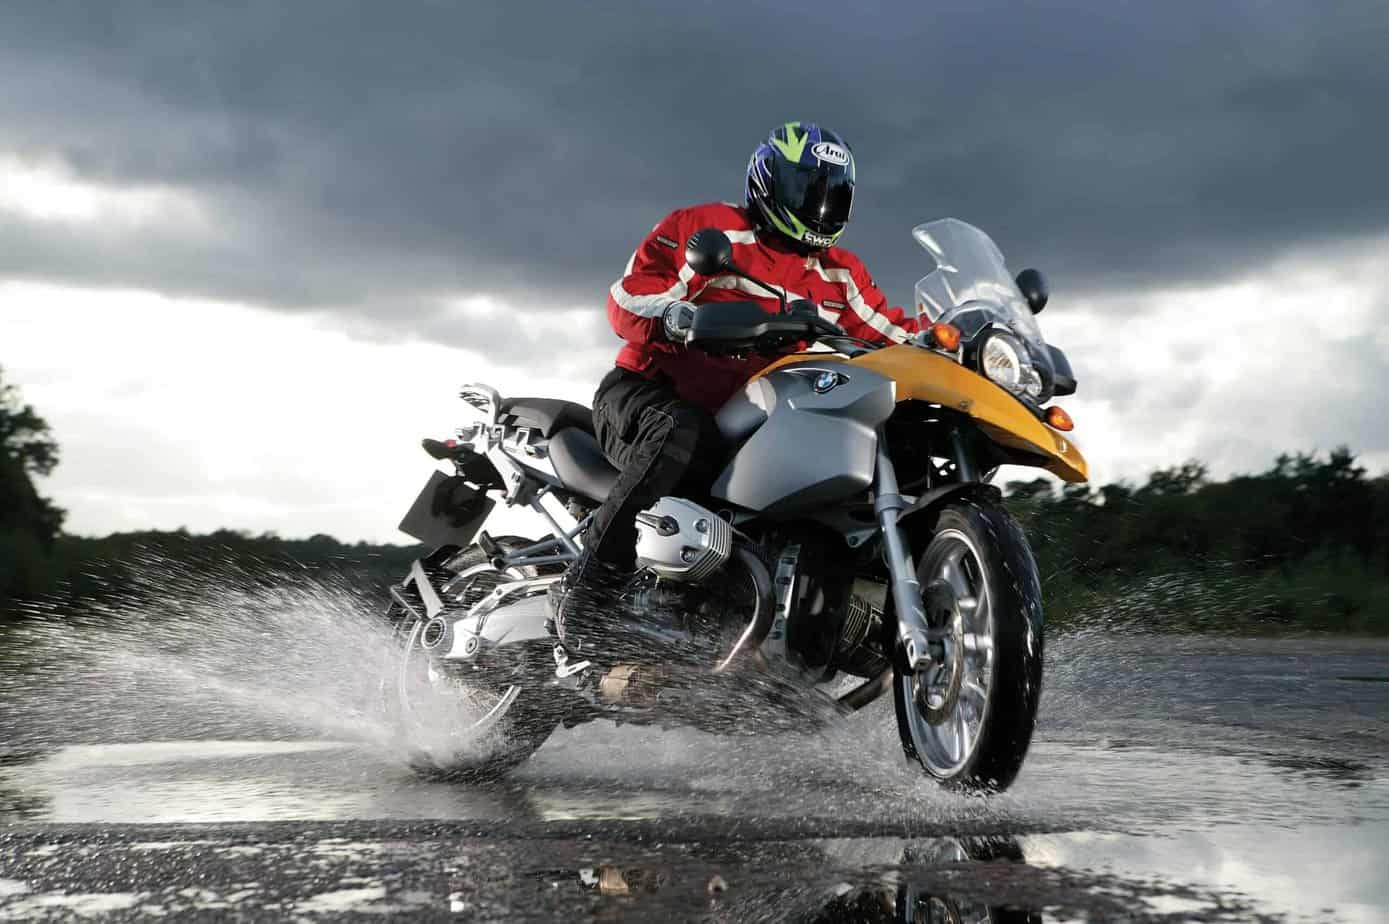 Will Rain Damage a Motorcycle